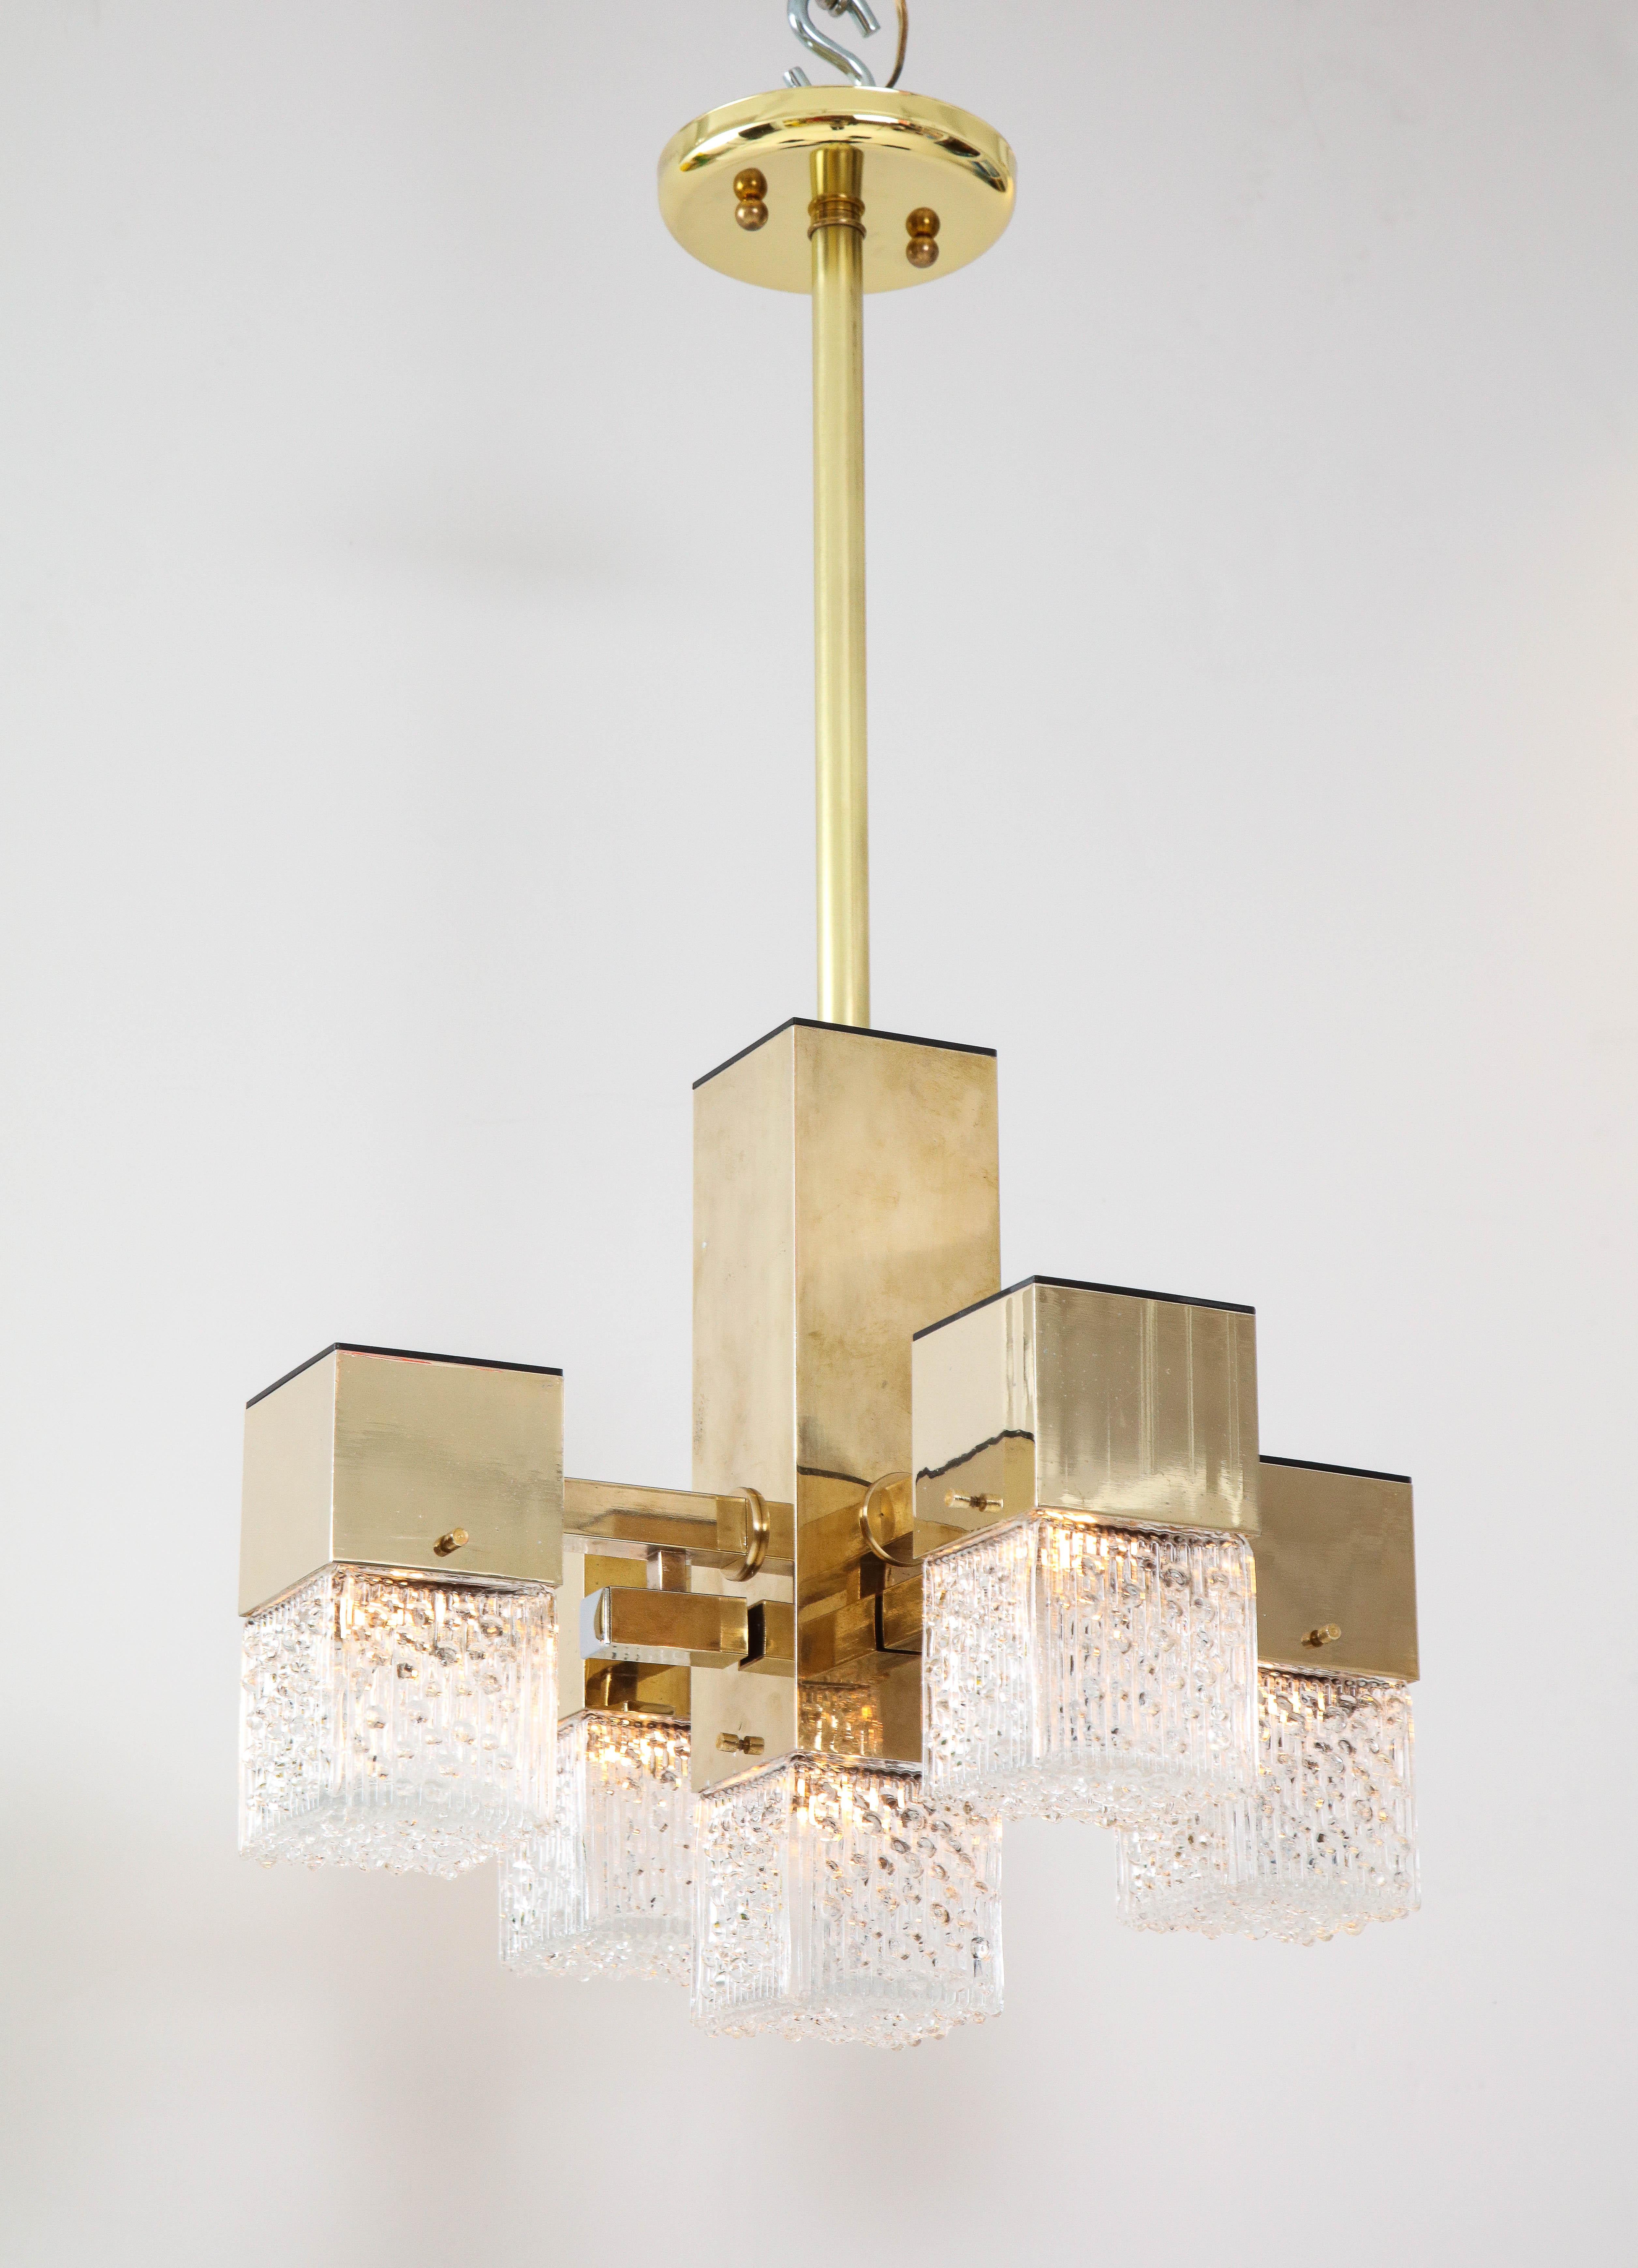 Brass cubic chandelier by sciolari
The brass frame which has a wonderful patina has been newly rewired for the US
with candelabra sockets and comes complete with a brass rod and ceiling canopy.